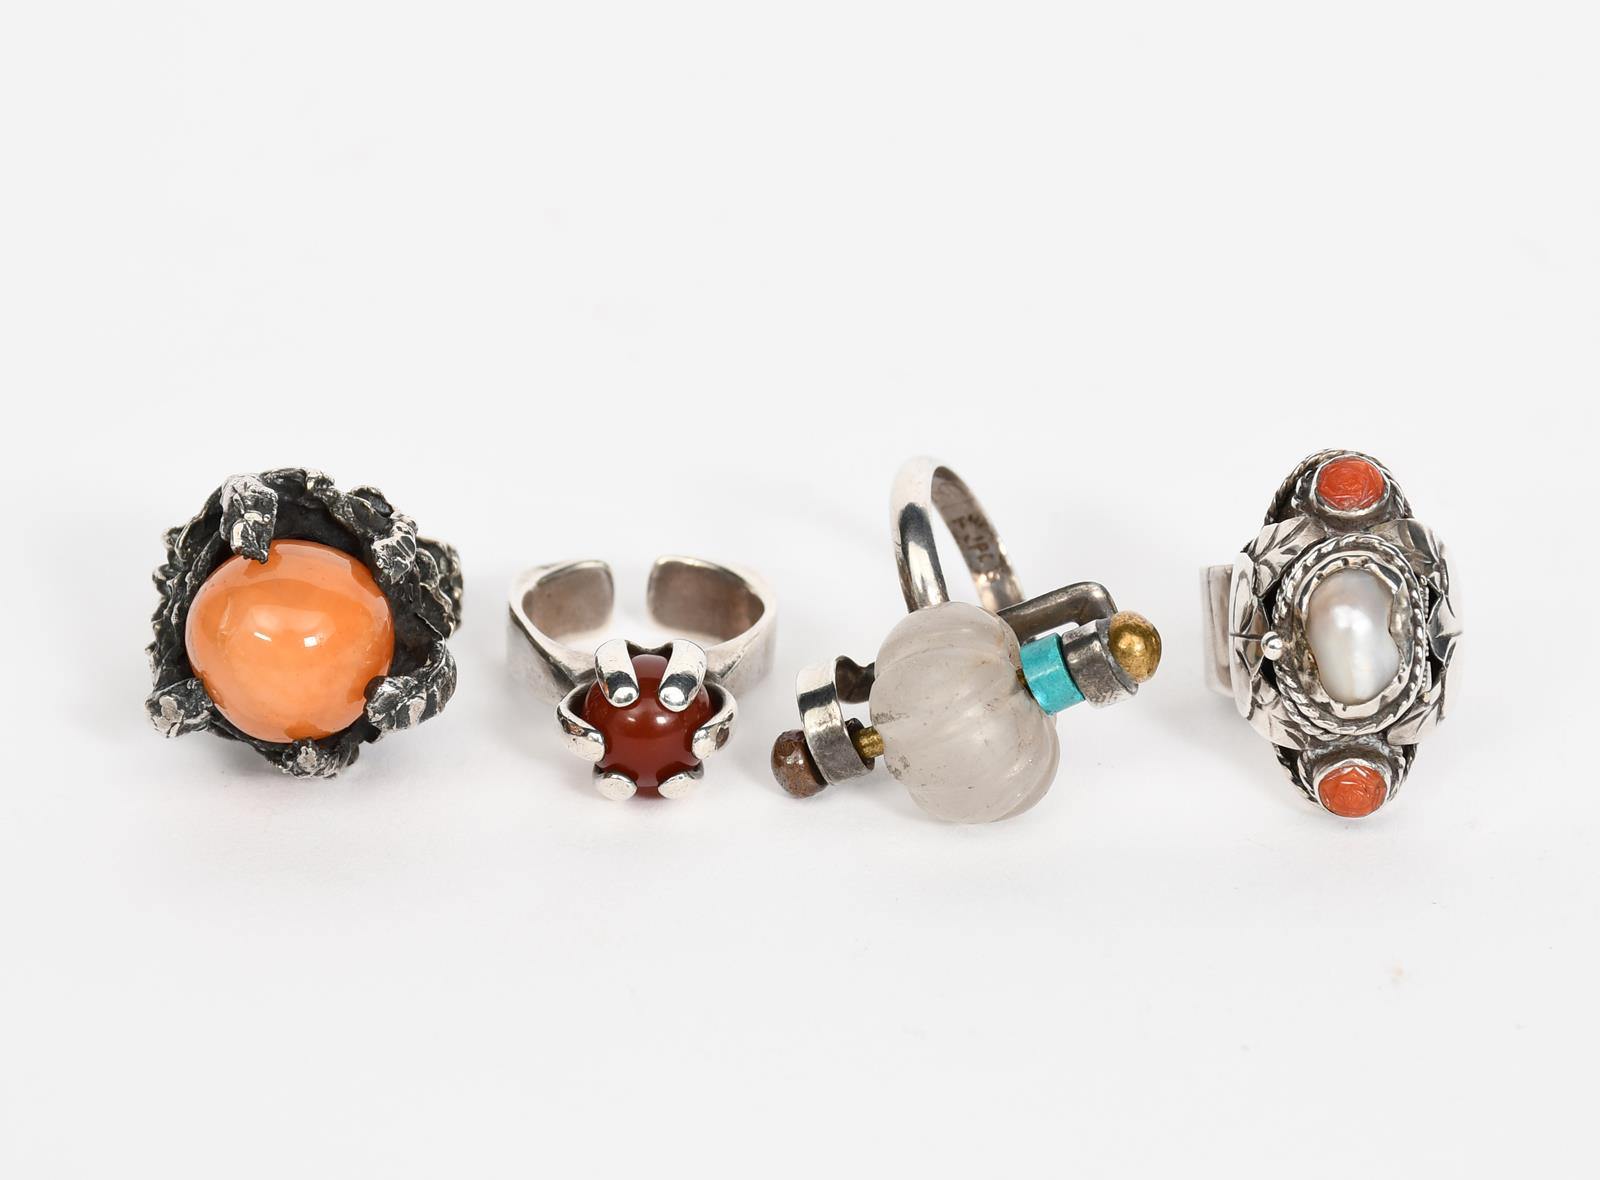 An English silver ring, the clasp ball shoulder encasing a spherical red/amber stone, a Mexican